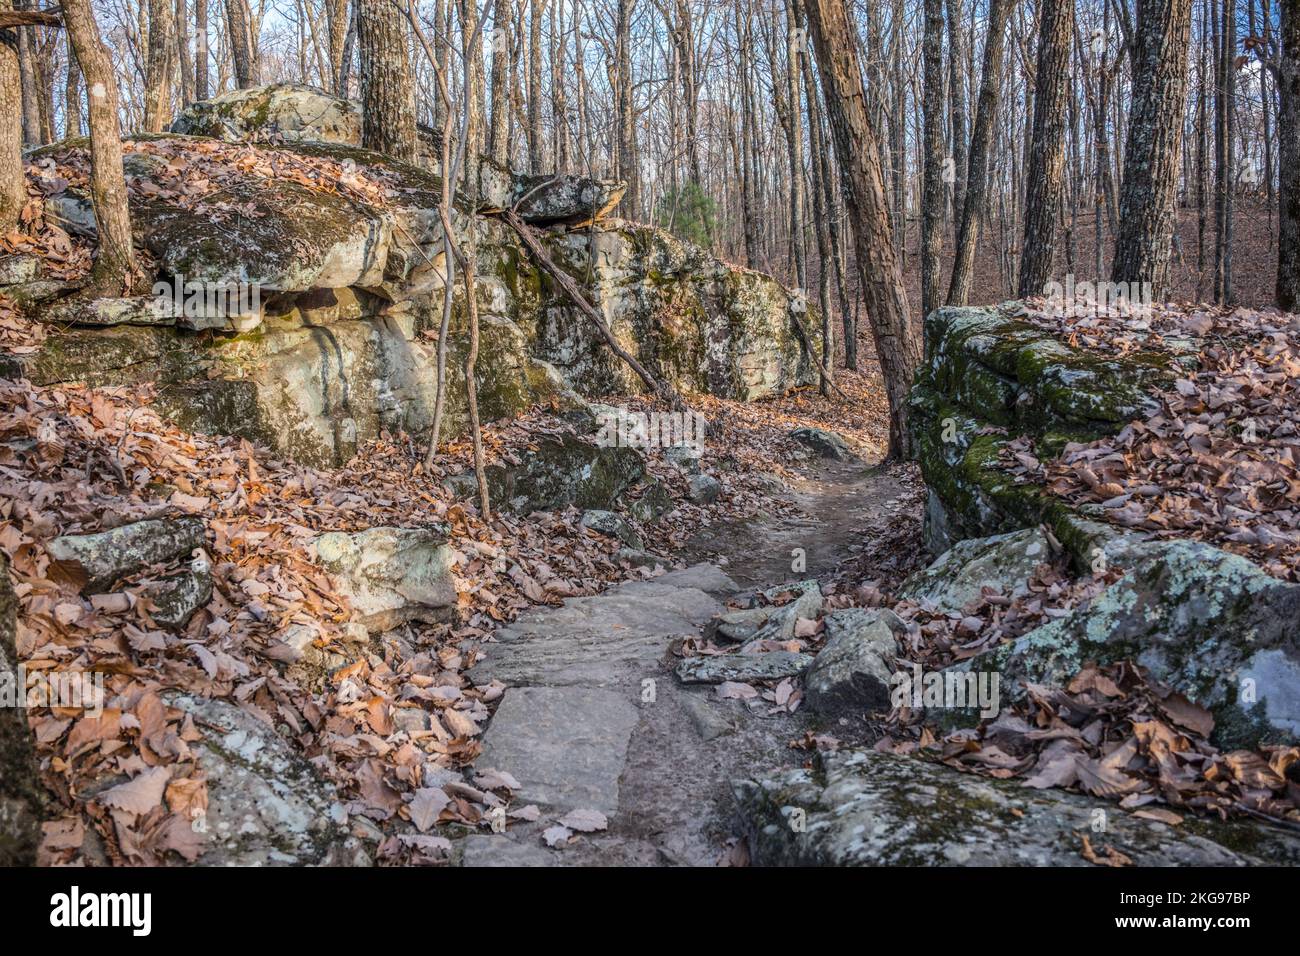 A rocky trail through the boulders in the mountains surrounded by bare trees and fallen leaves in a forest on a sunny day in late autumn Stock Photo